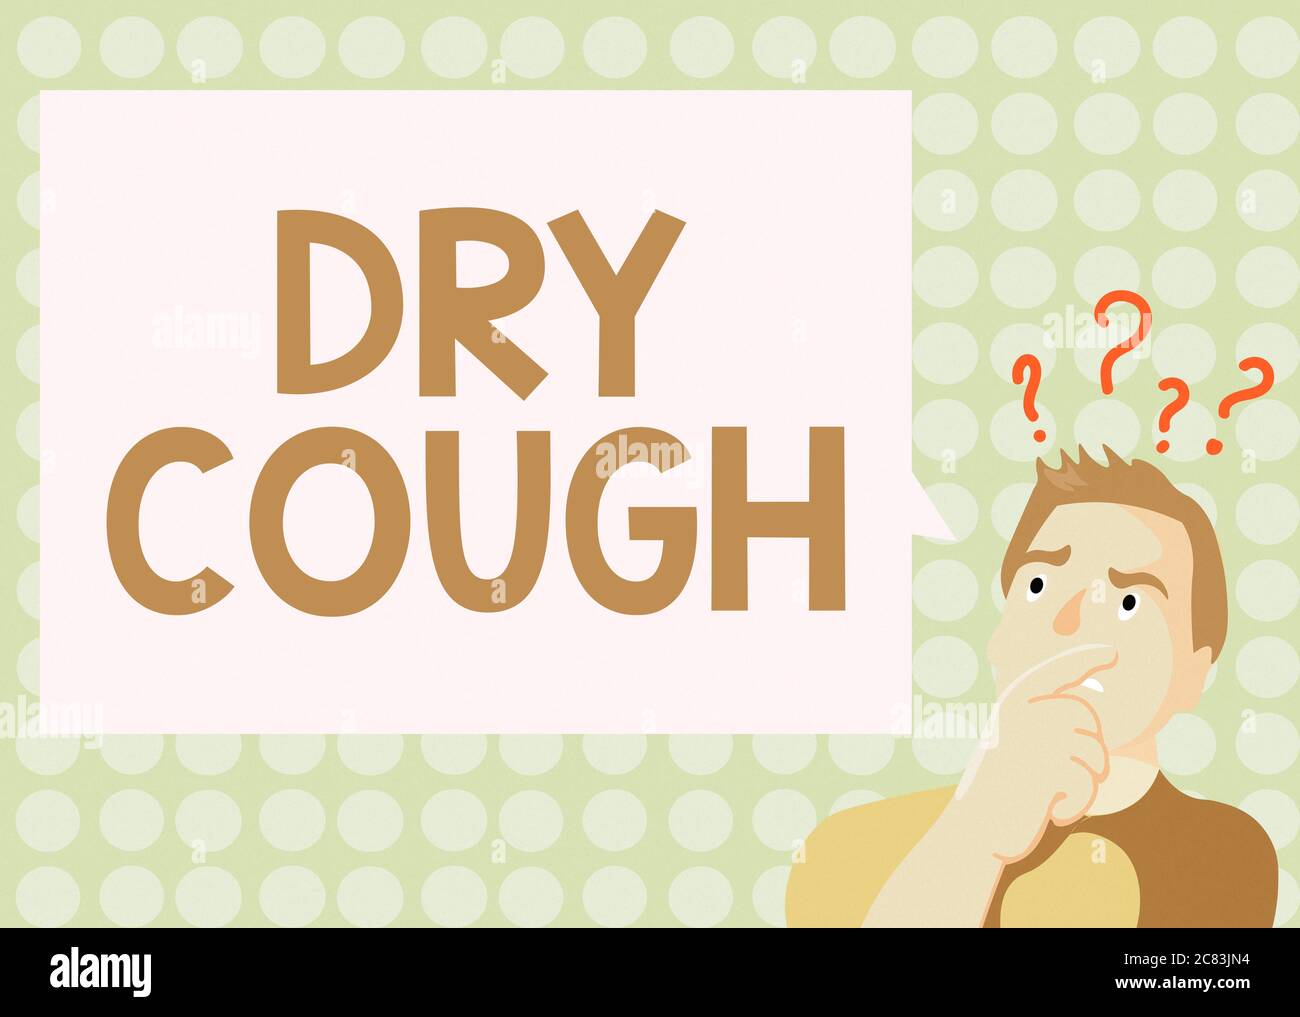 Dry cough meaning